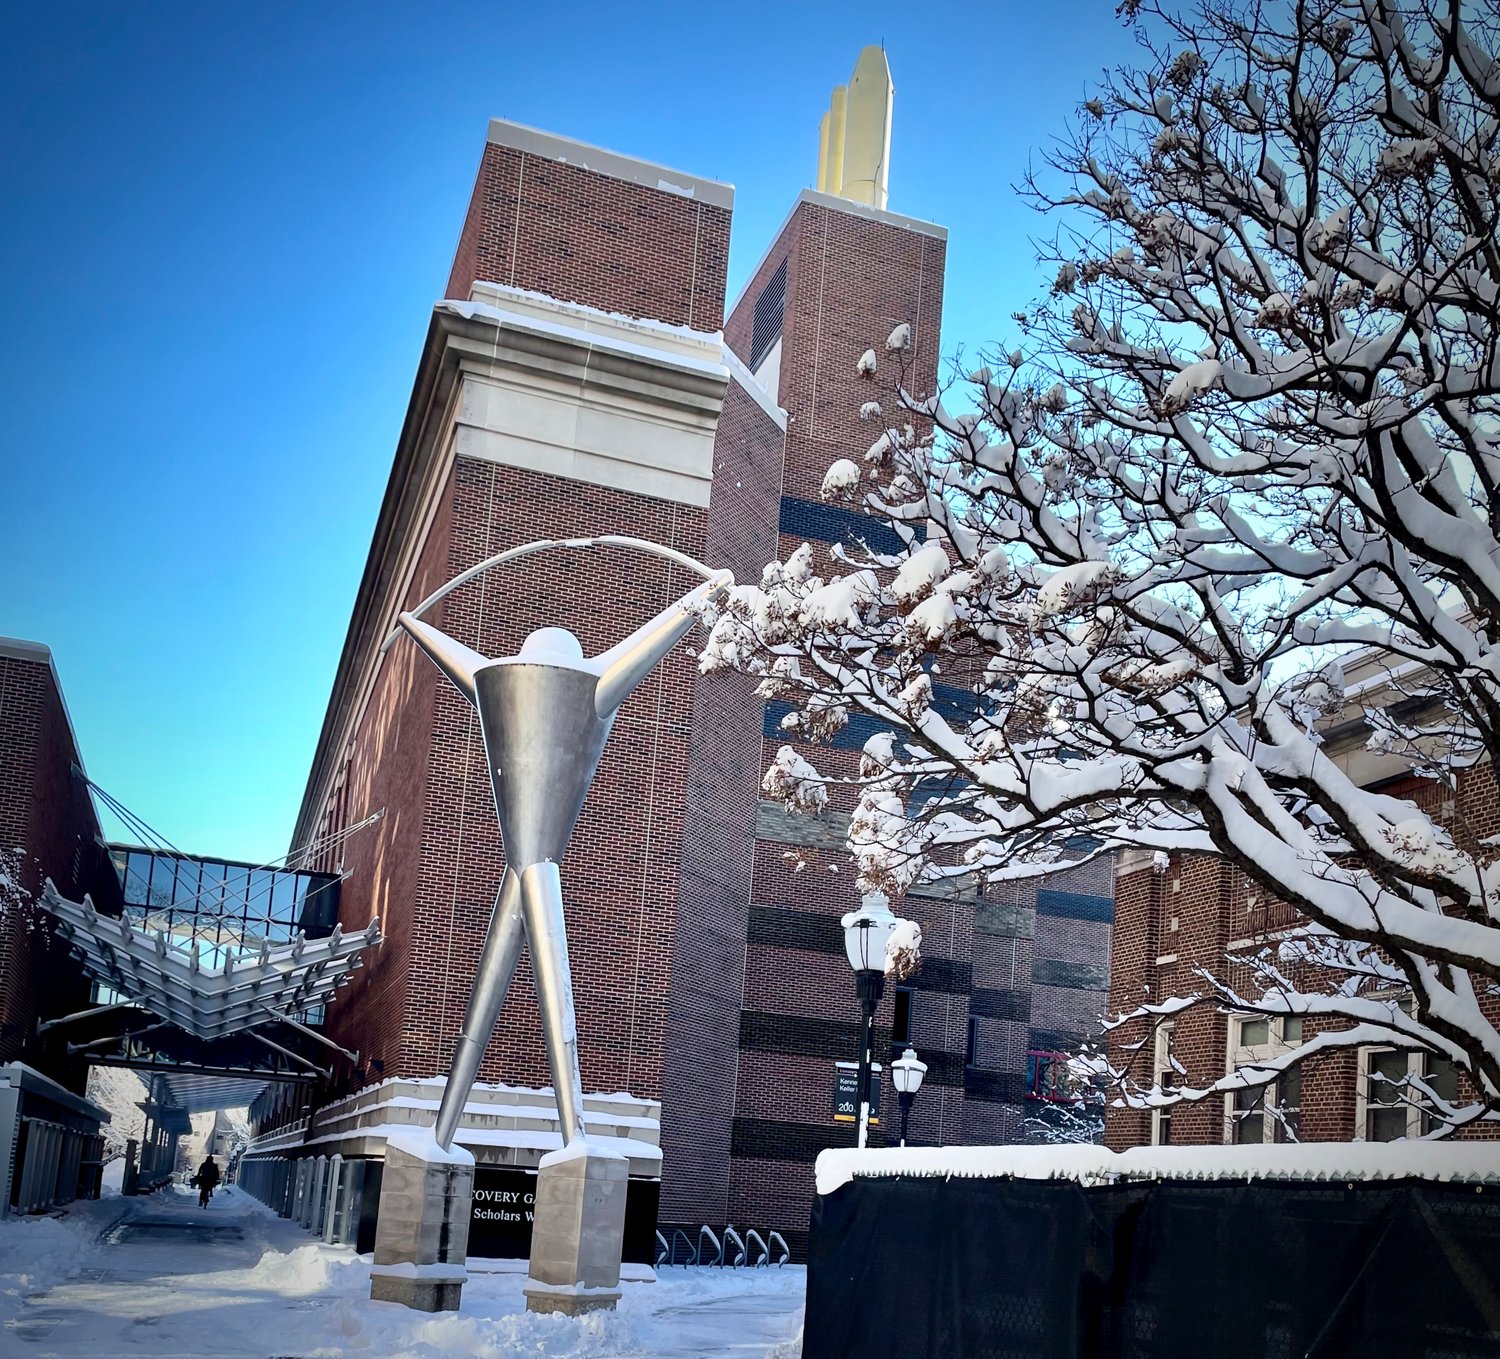 #3) Outside the Mechanical Engineering Building rises the “Platonic figure“ by local favorite, Andrew Leicester.